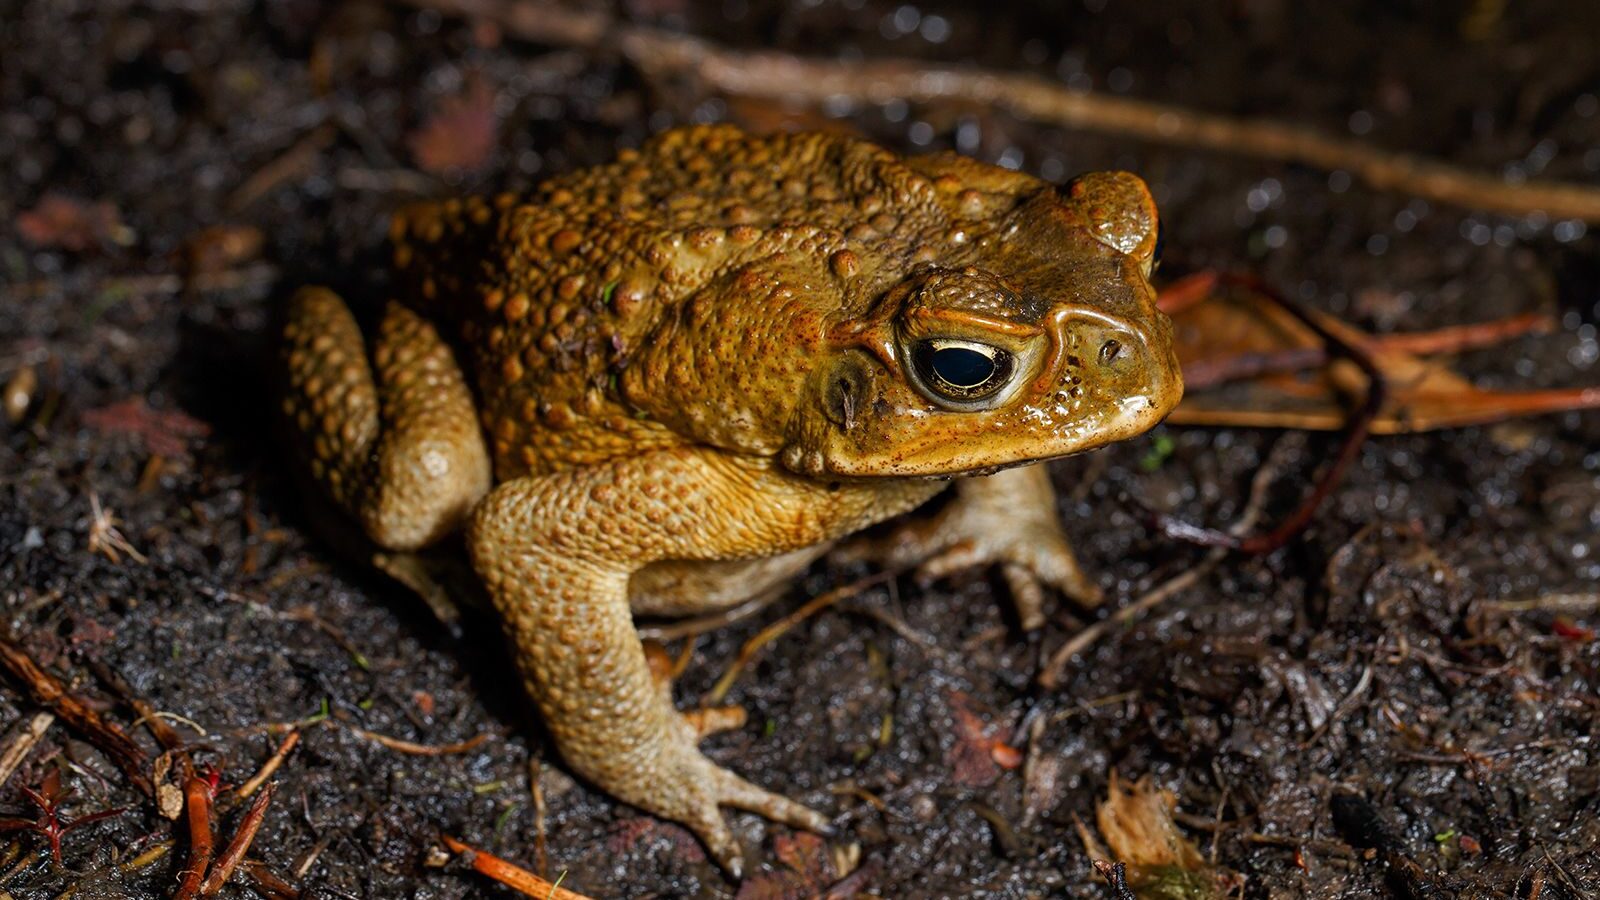 Cane toads produce poison in large glands perched on their shoulders that's fatal for some animals....